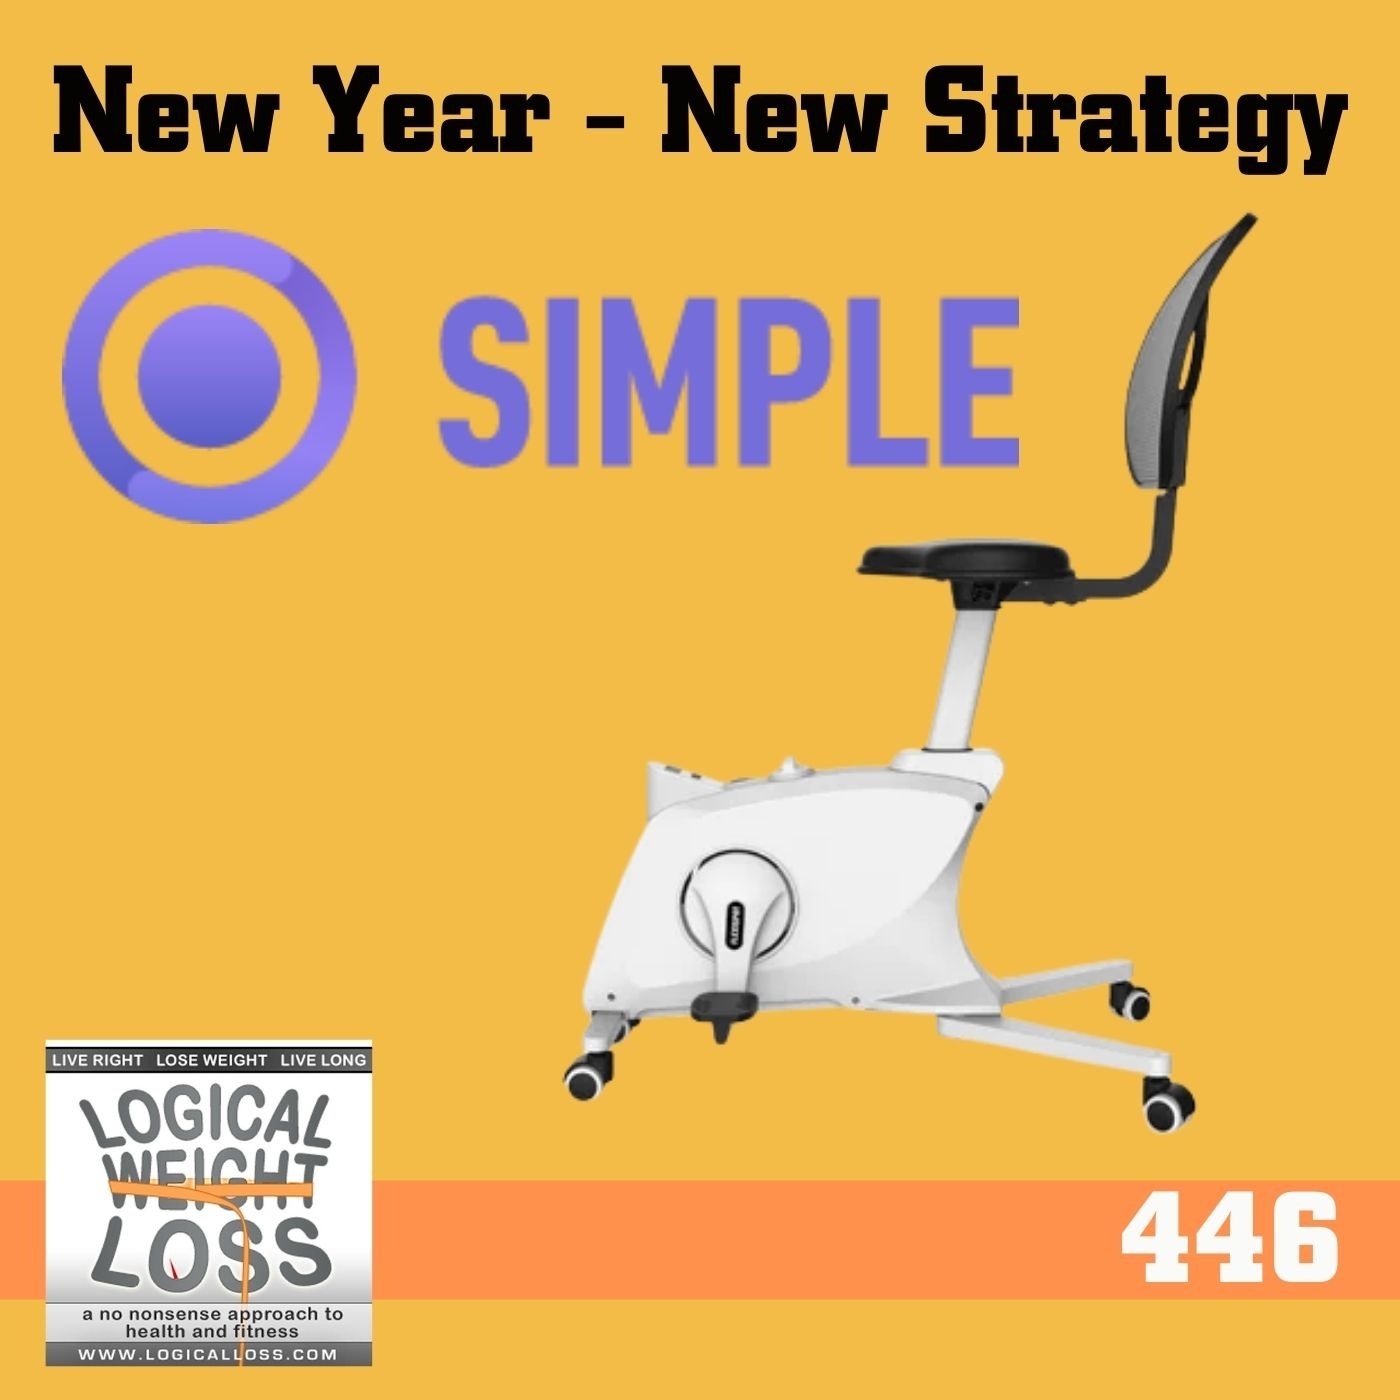 Its Time to Do Something Different - New Year - New Strategy Image